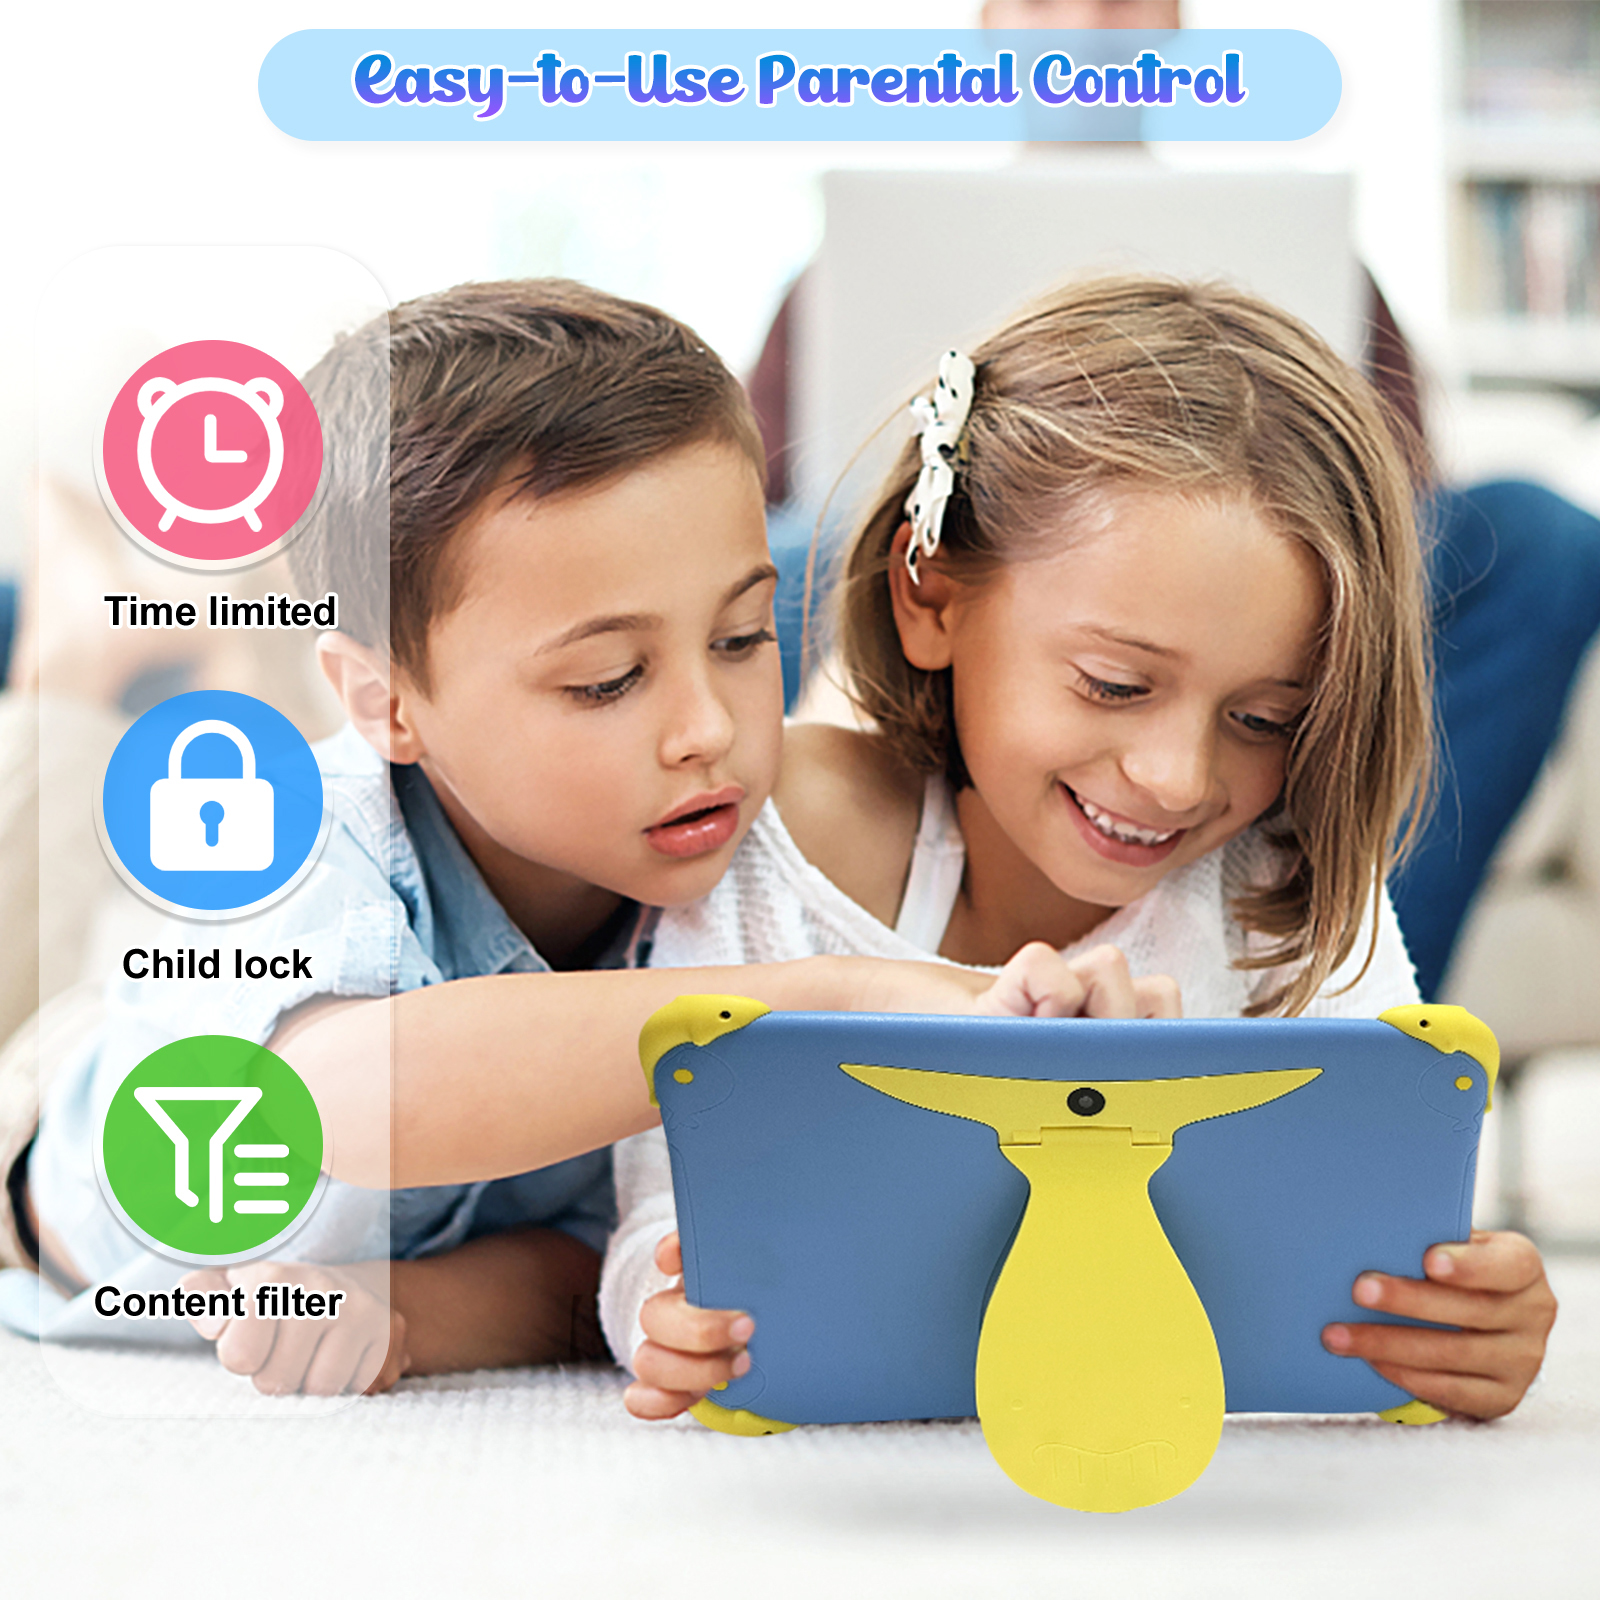 NEW 8 inch GMS Android 11.0 Wifi Rugged Tablet PC RK3326 Quad core for Kids learning educational iwawa Tablets